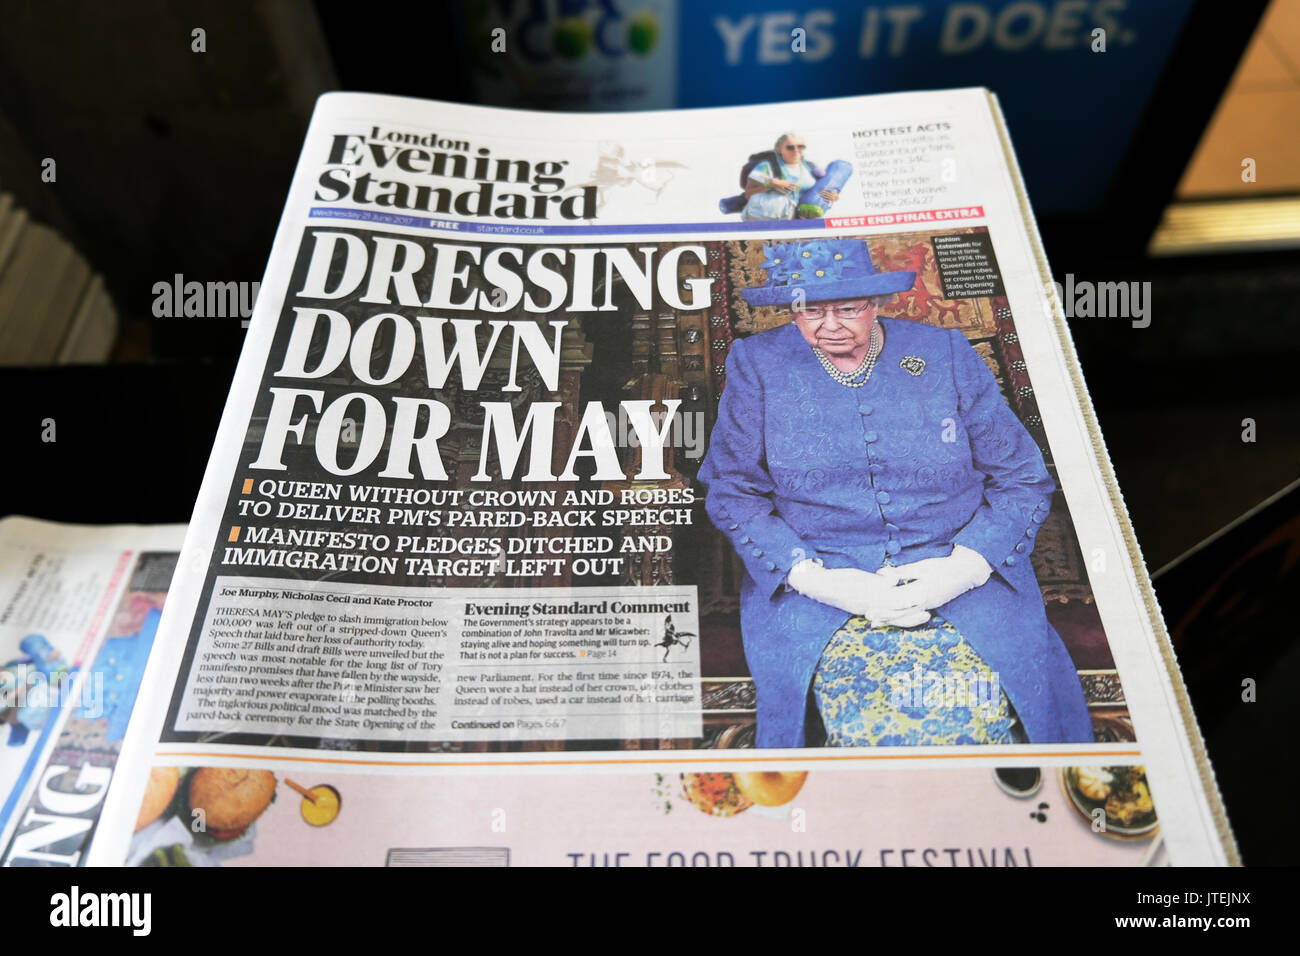 Evening Standard front page newspaper Brexit headline British Queen Elizabeth II  'Dressing down for May'  21 June  2017   London England UK Stock Photo